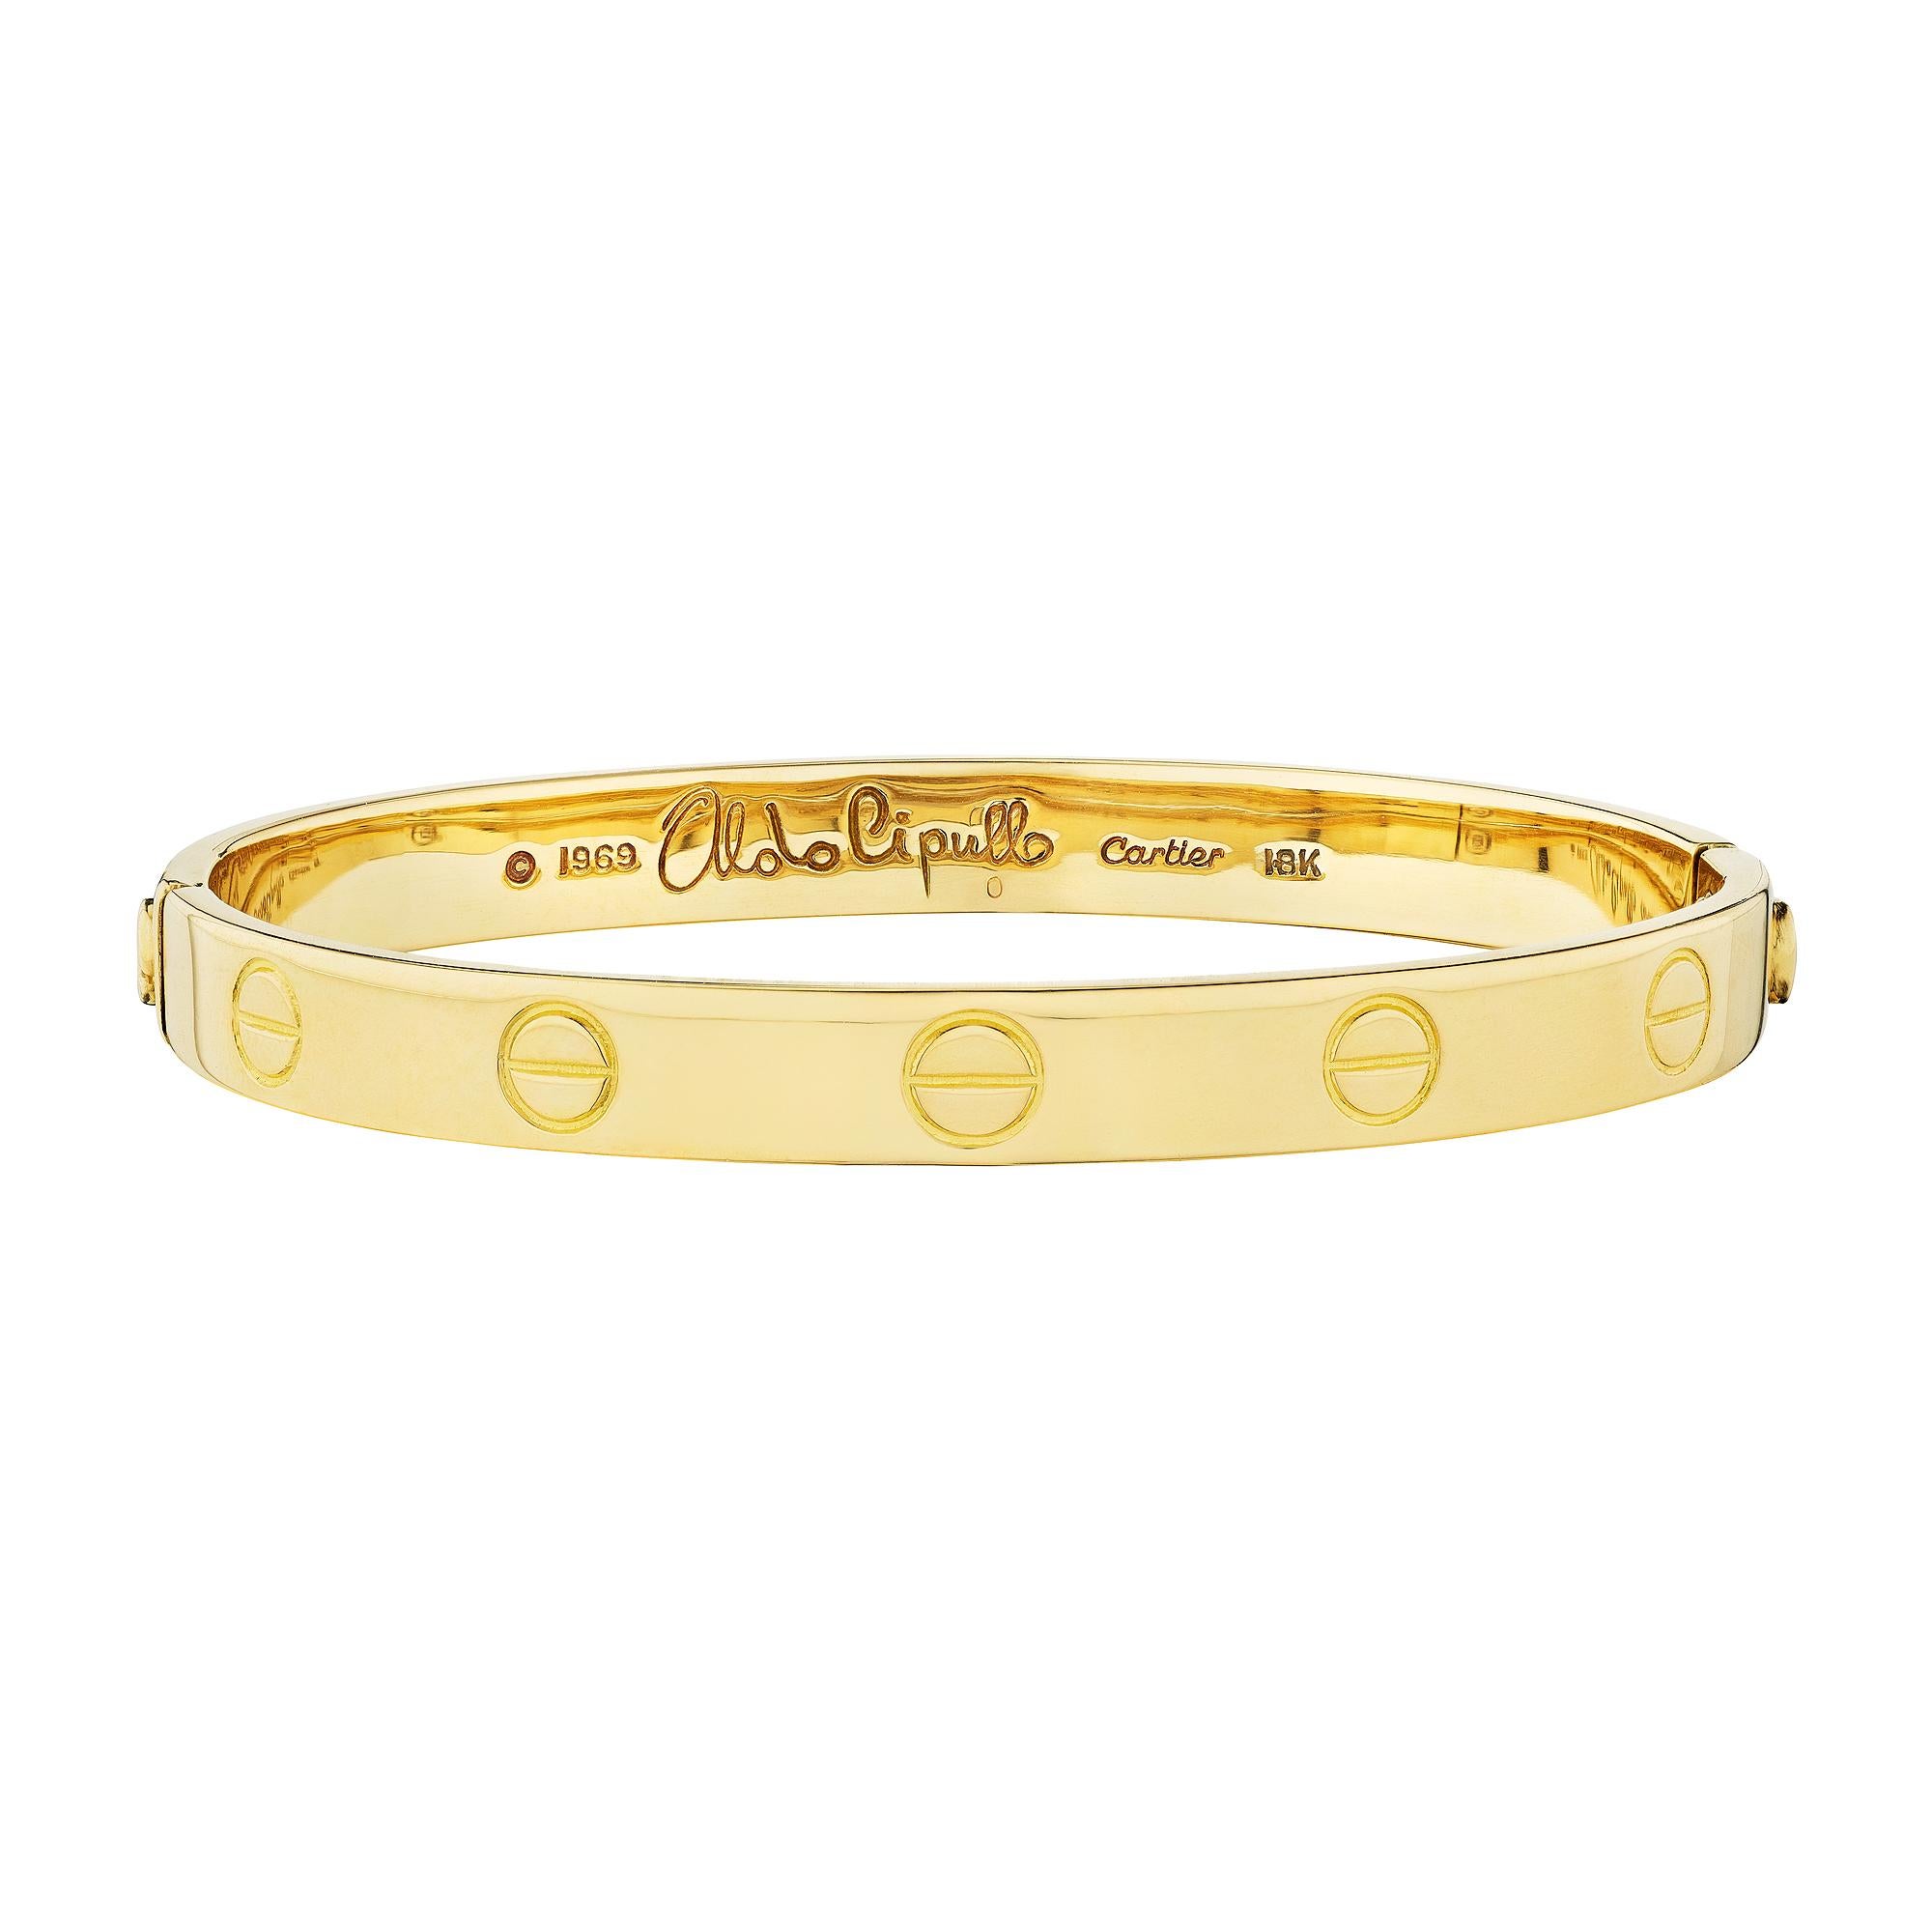 Be the first.  This signed Aldo Cipullo by Cartier 18 karat yellow gold 'LOVE' bangle bracelet was one of the first designed and manufactured in 1969.  Stamped with the date 1969, this size 15 Aldo Cipullo bracelet will always push you to the head